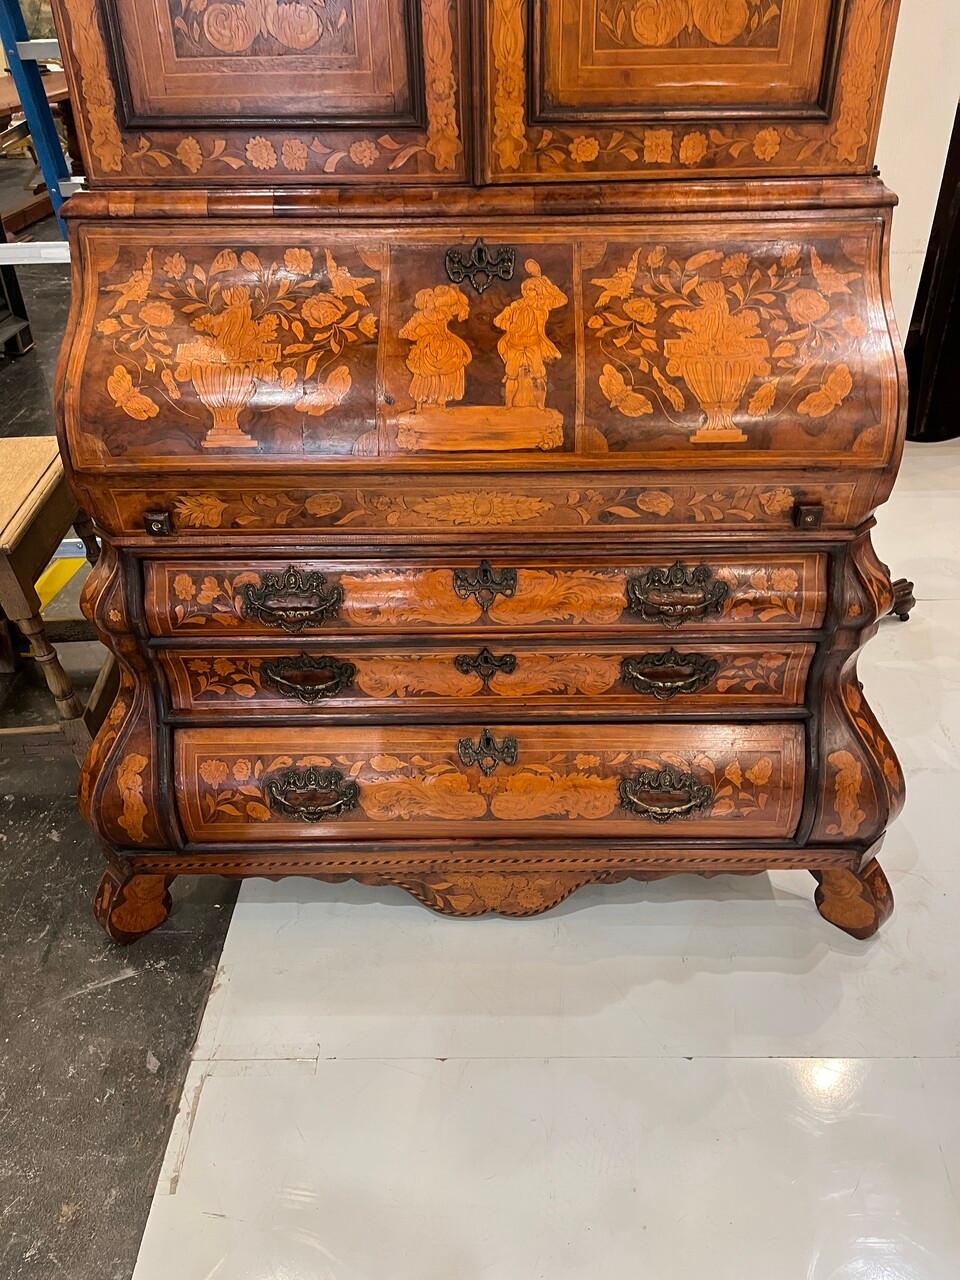 An exquisite 18th-century Dutch marquetry secretary, adorned with meticulous inlay work depicting urns, vines, and floral motifs. Its double-door top cabinet adds grandeur, while the desk boasts numerous compartments and cubby storage drawers,